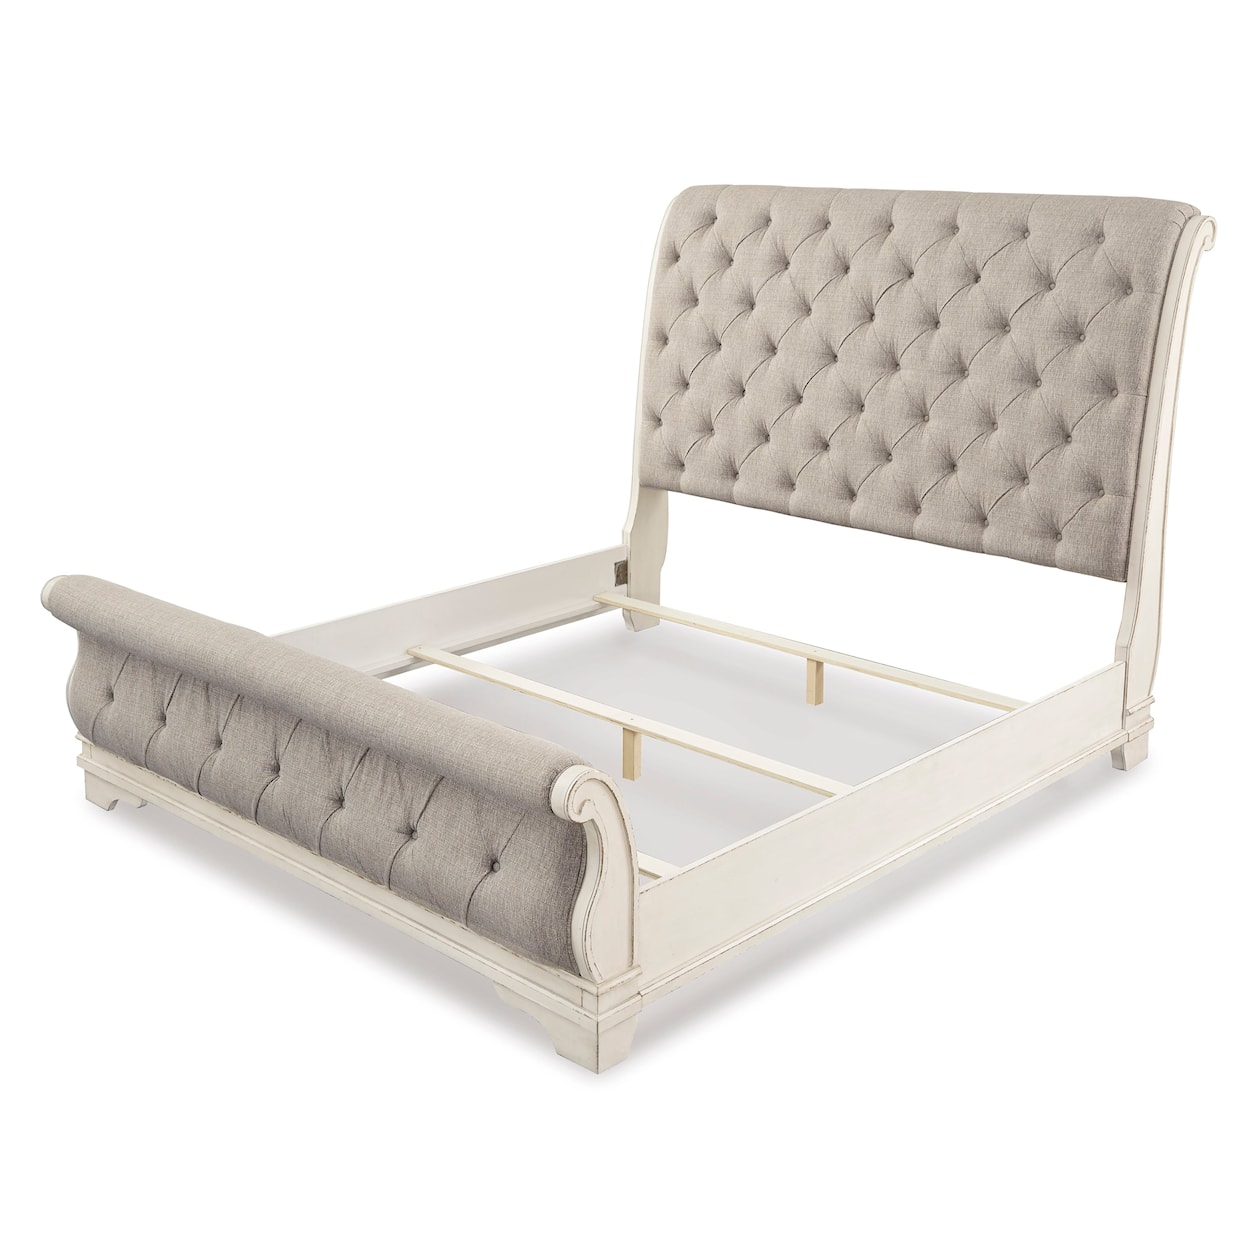 Signature Design 15123 CA. King Upholstered Sleigh Bed